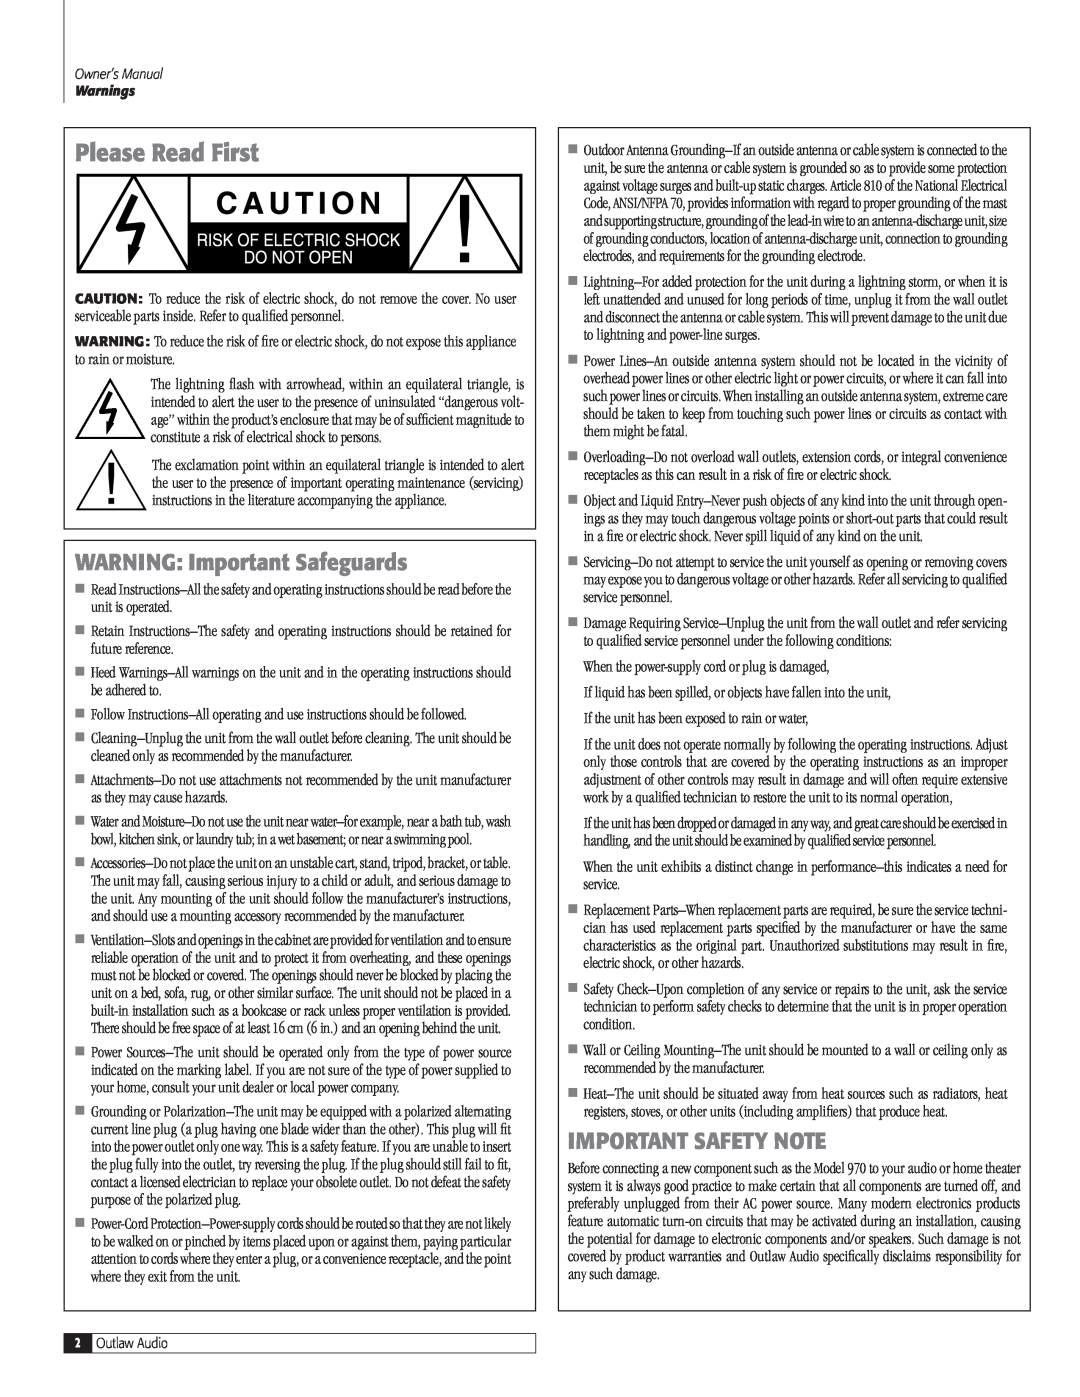 Outlaw Audio 970 owner manual Please Read First, WARNING Important Safeguards, Important Safety Note 